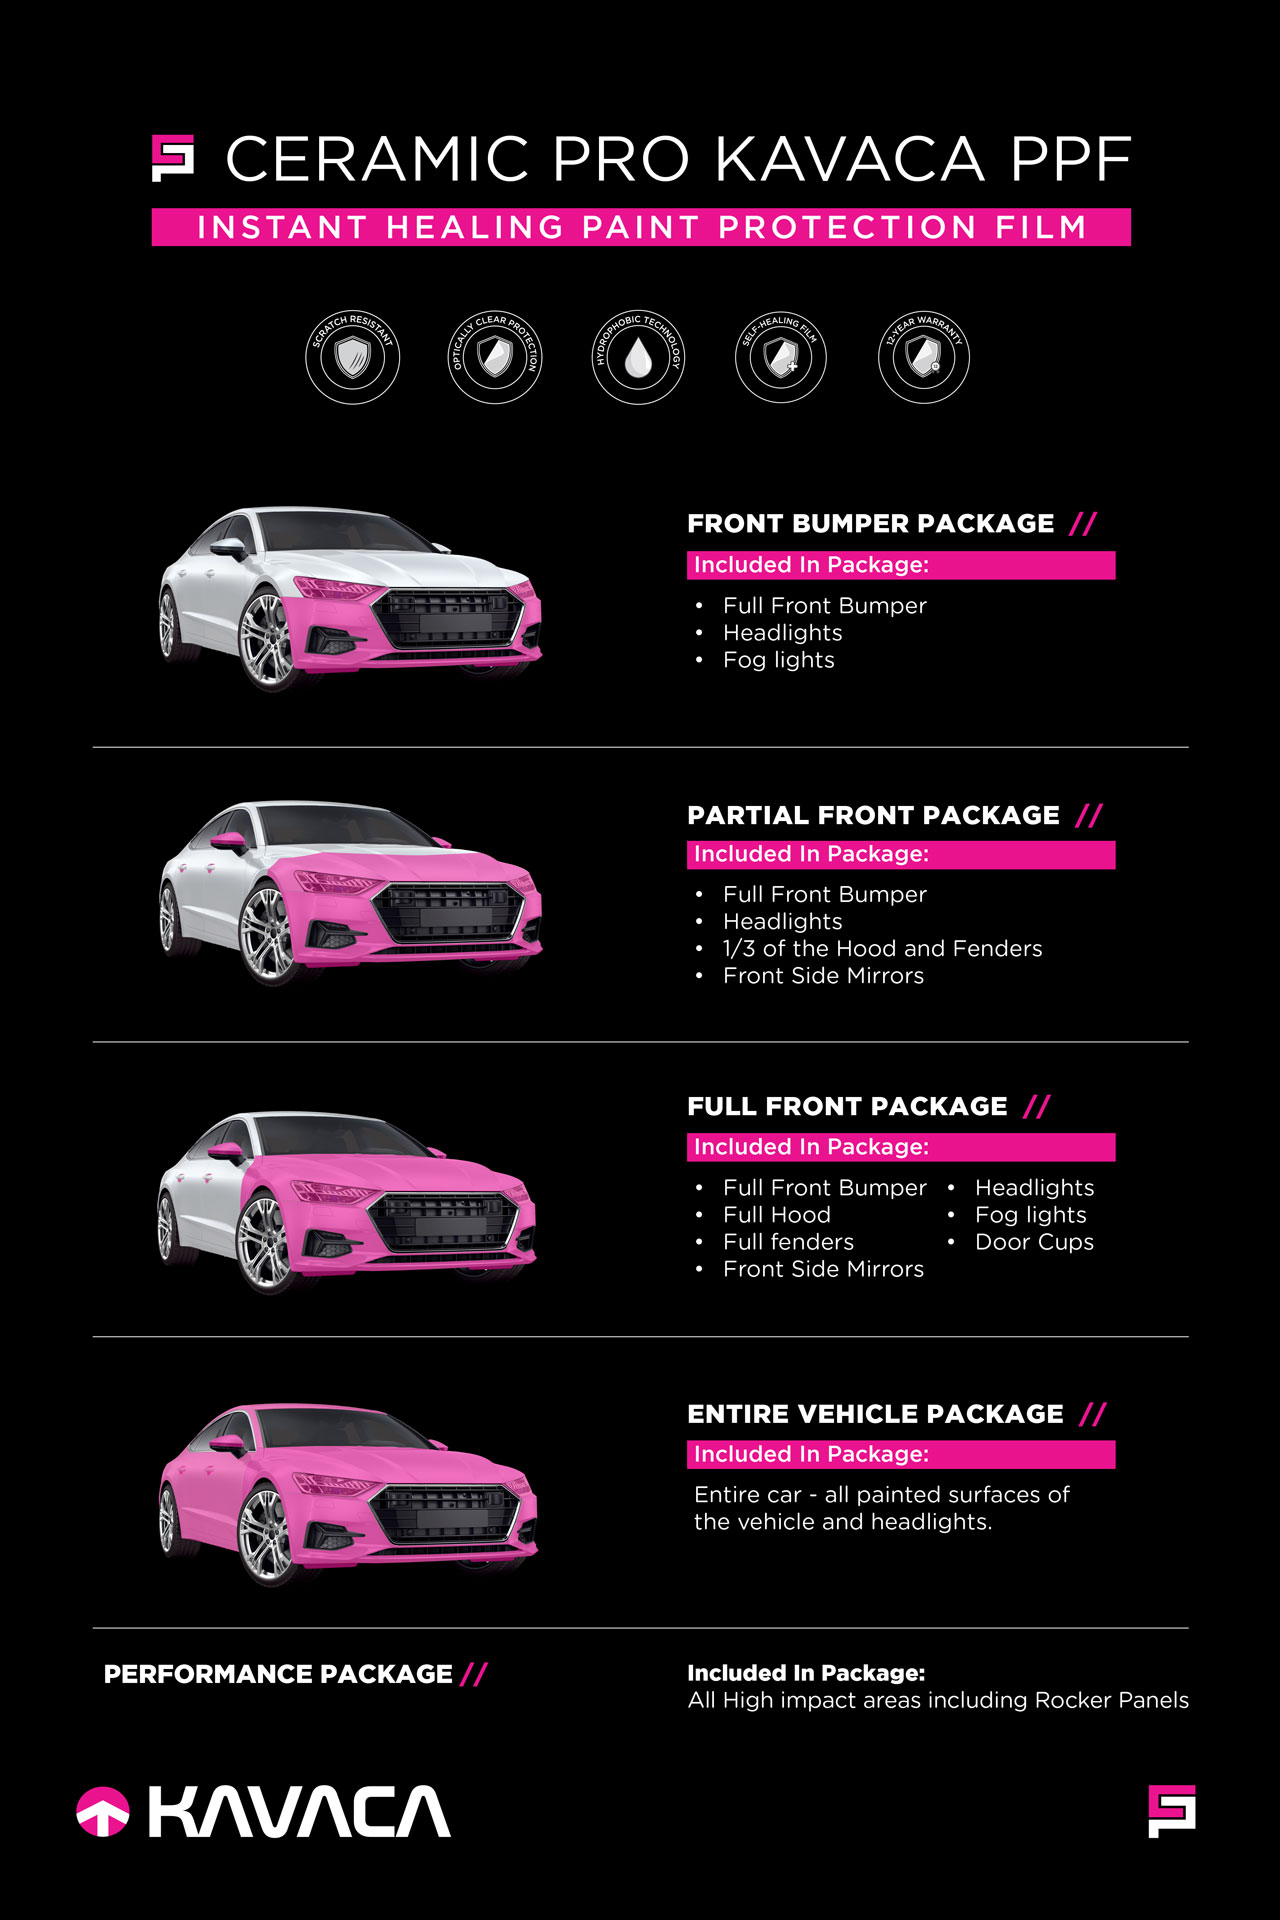 An outline of different areas you can install Ceramic Pro's KAVACA paint protection film.